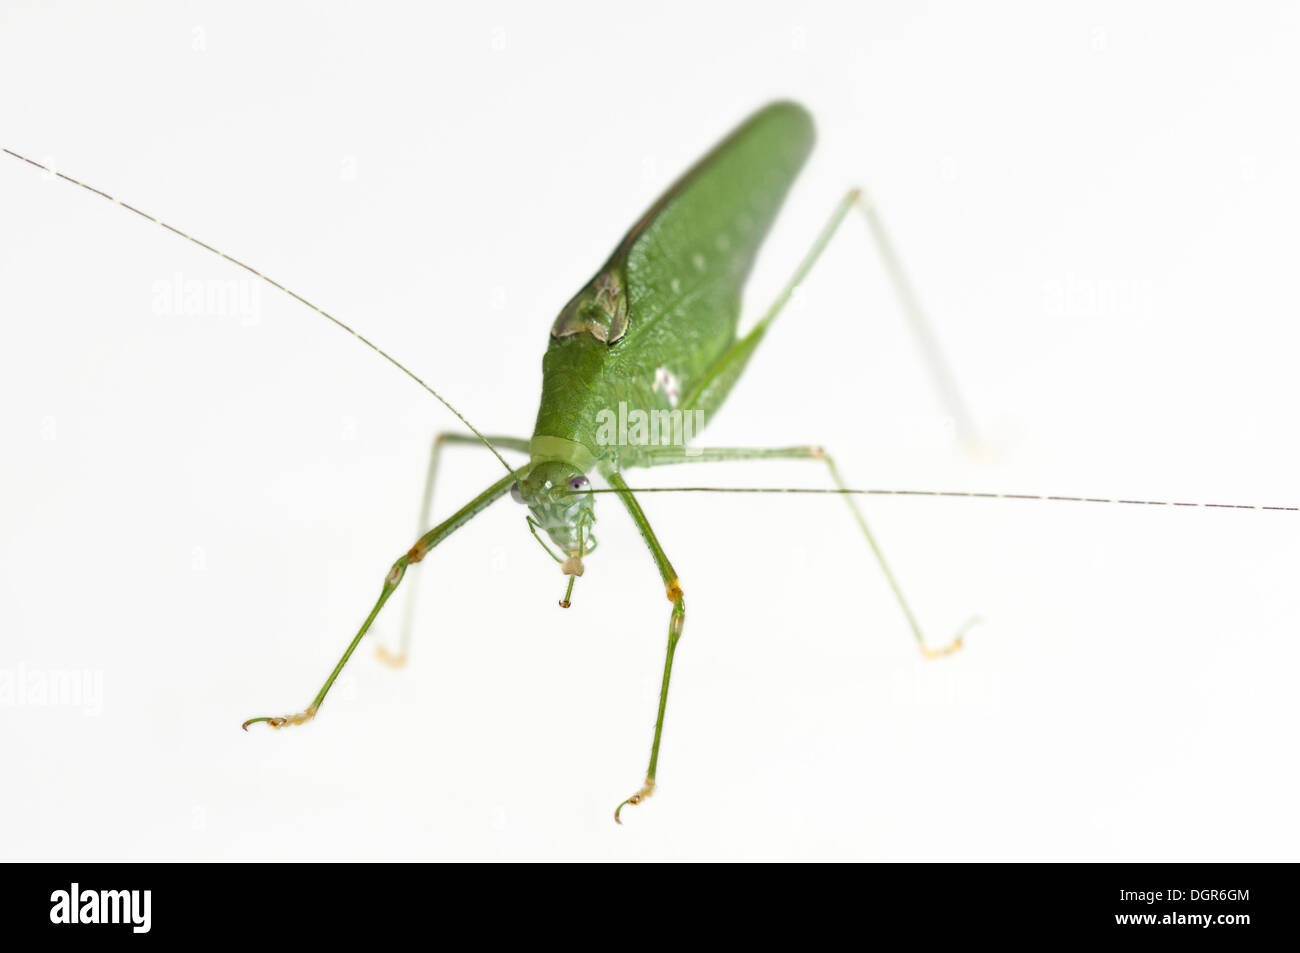 Green-colored variant of Oblong-Winged katydid Stock Photo